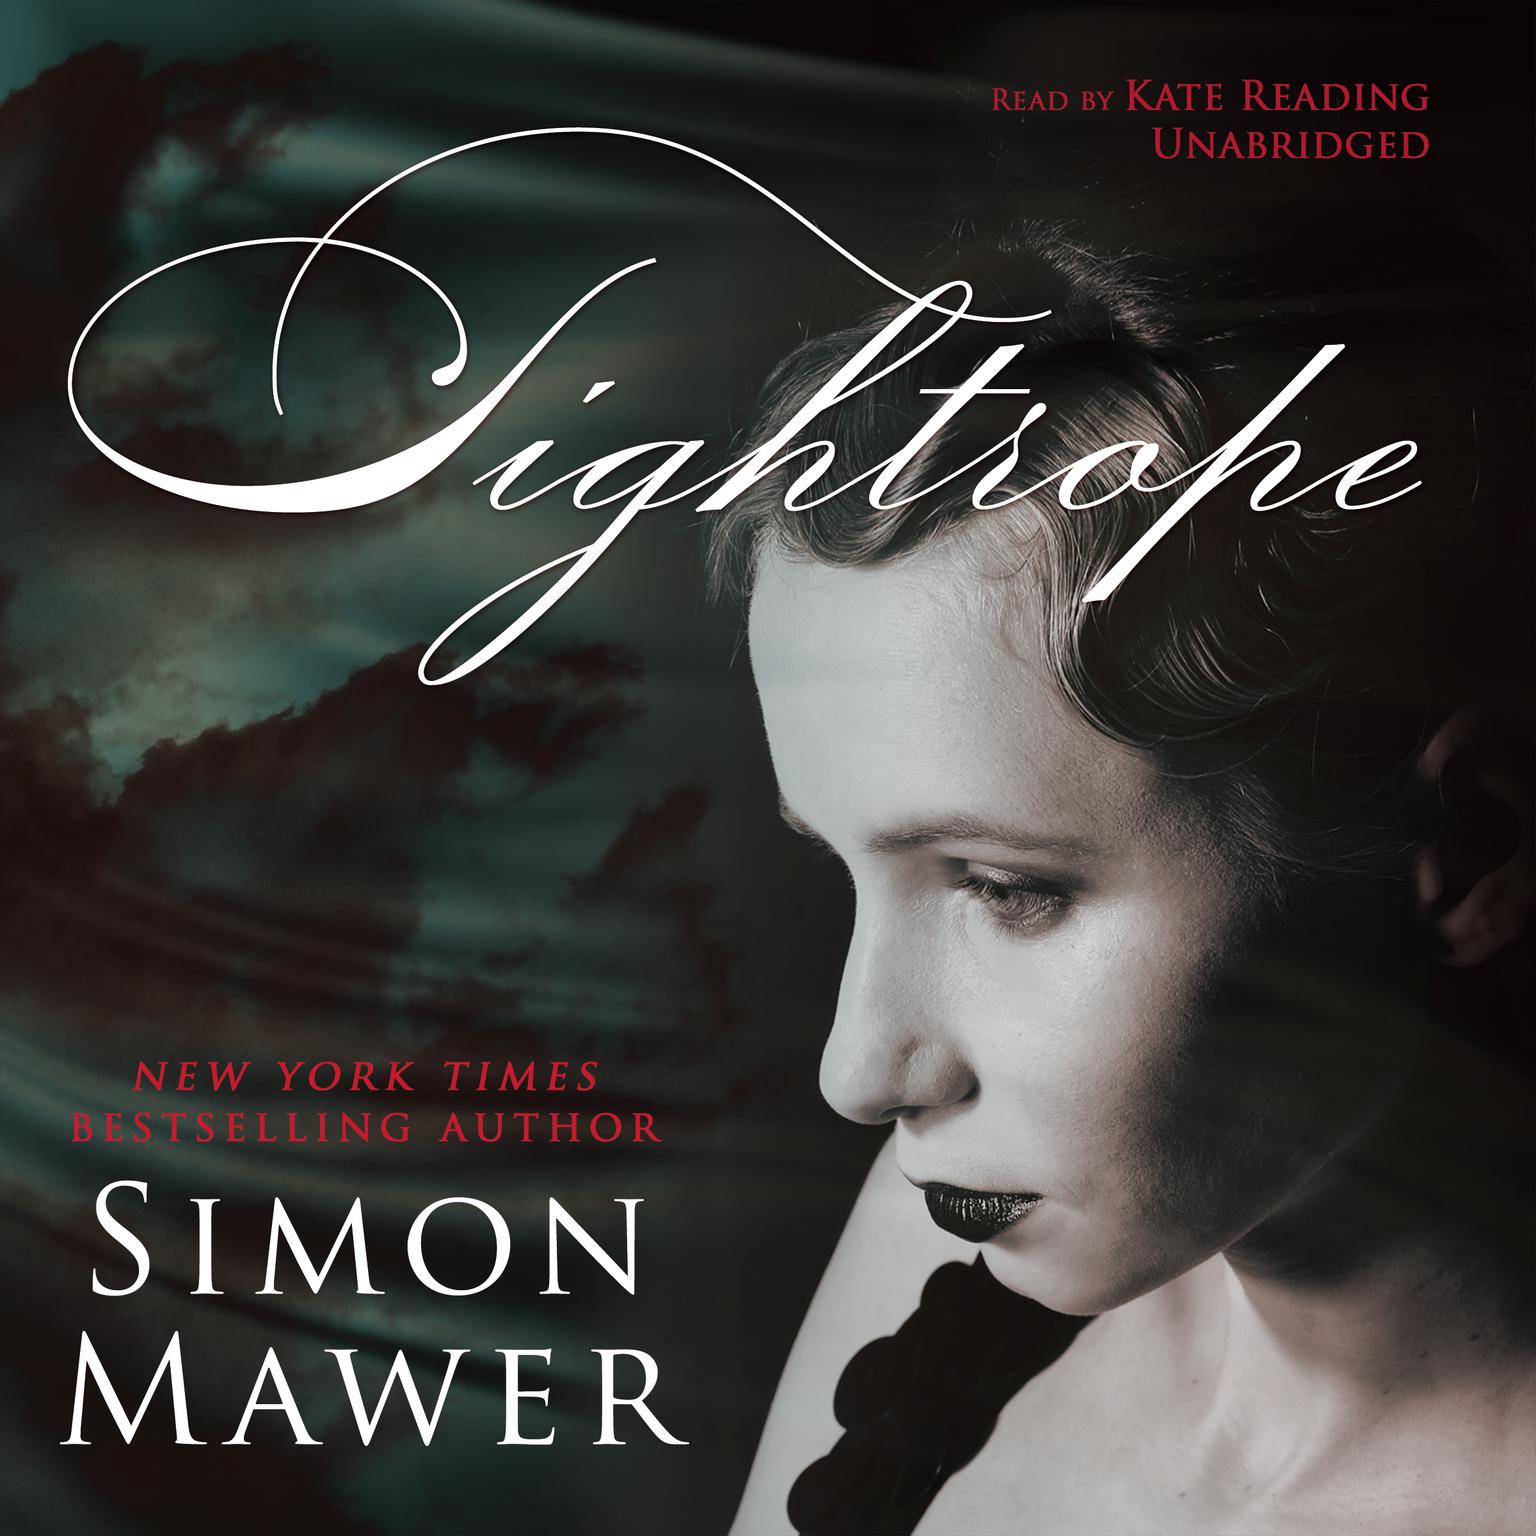 Tightrope Audiobook, by Simon Mawer